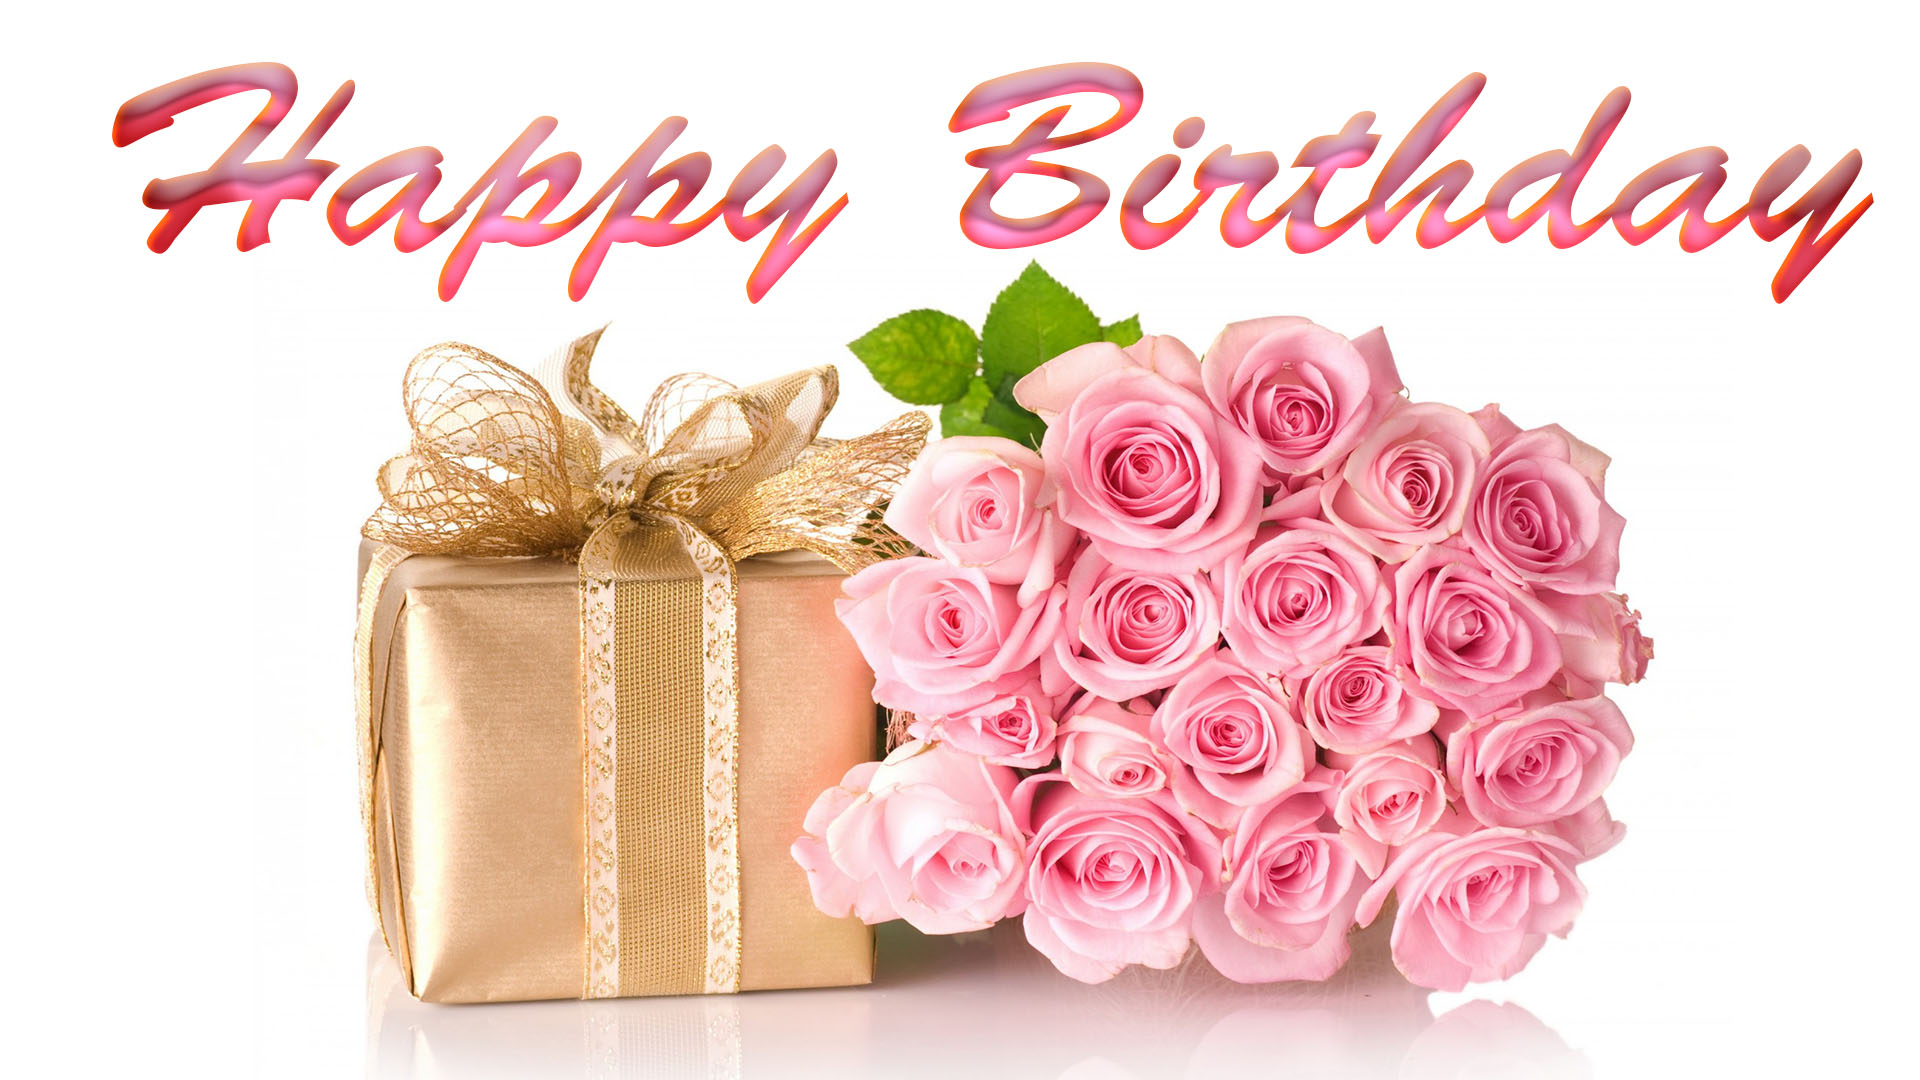 Happy Birthday Images HD Wallpaper - Wishes Quotes Images